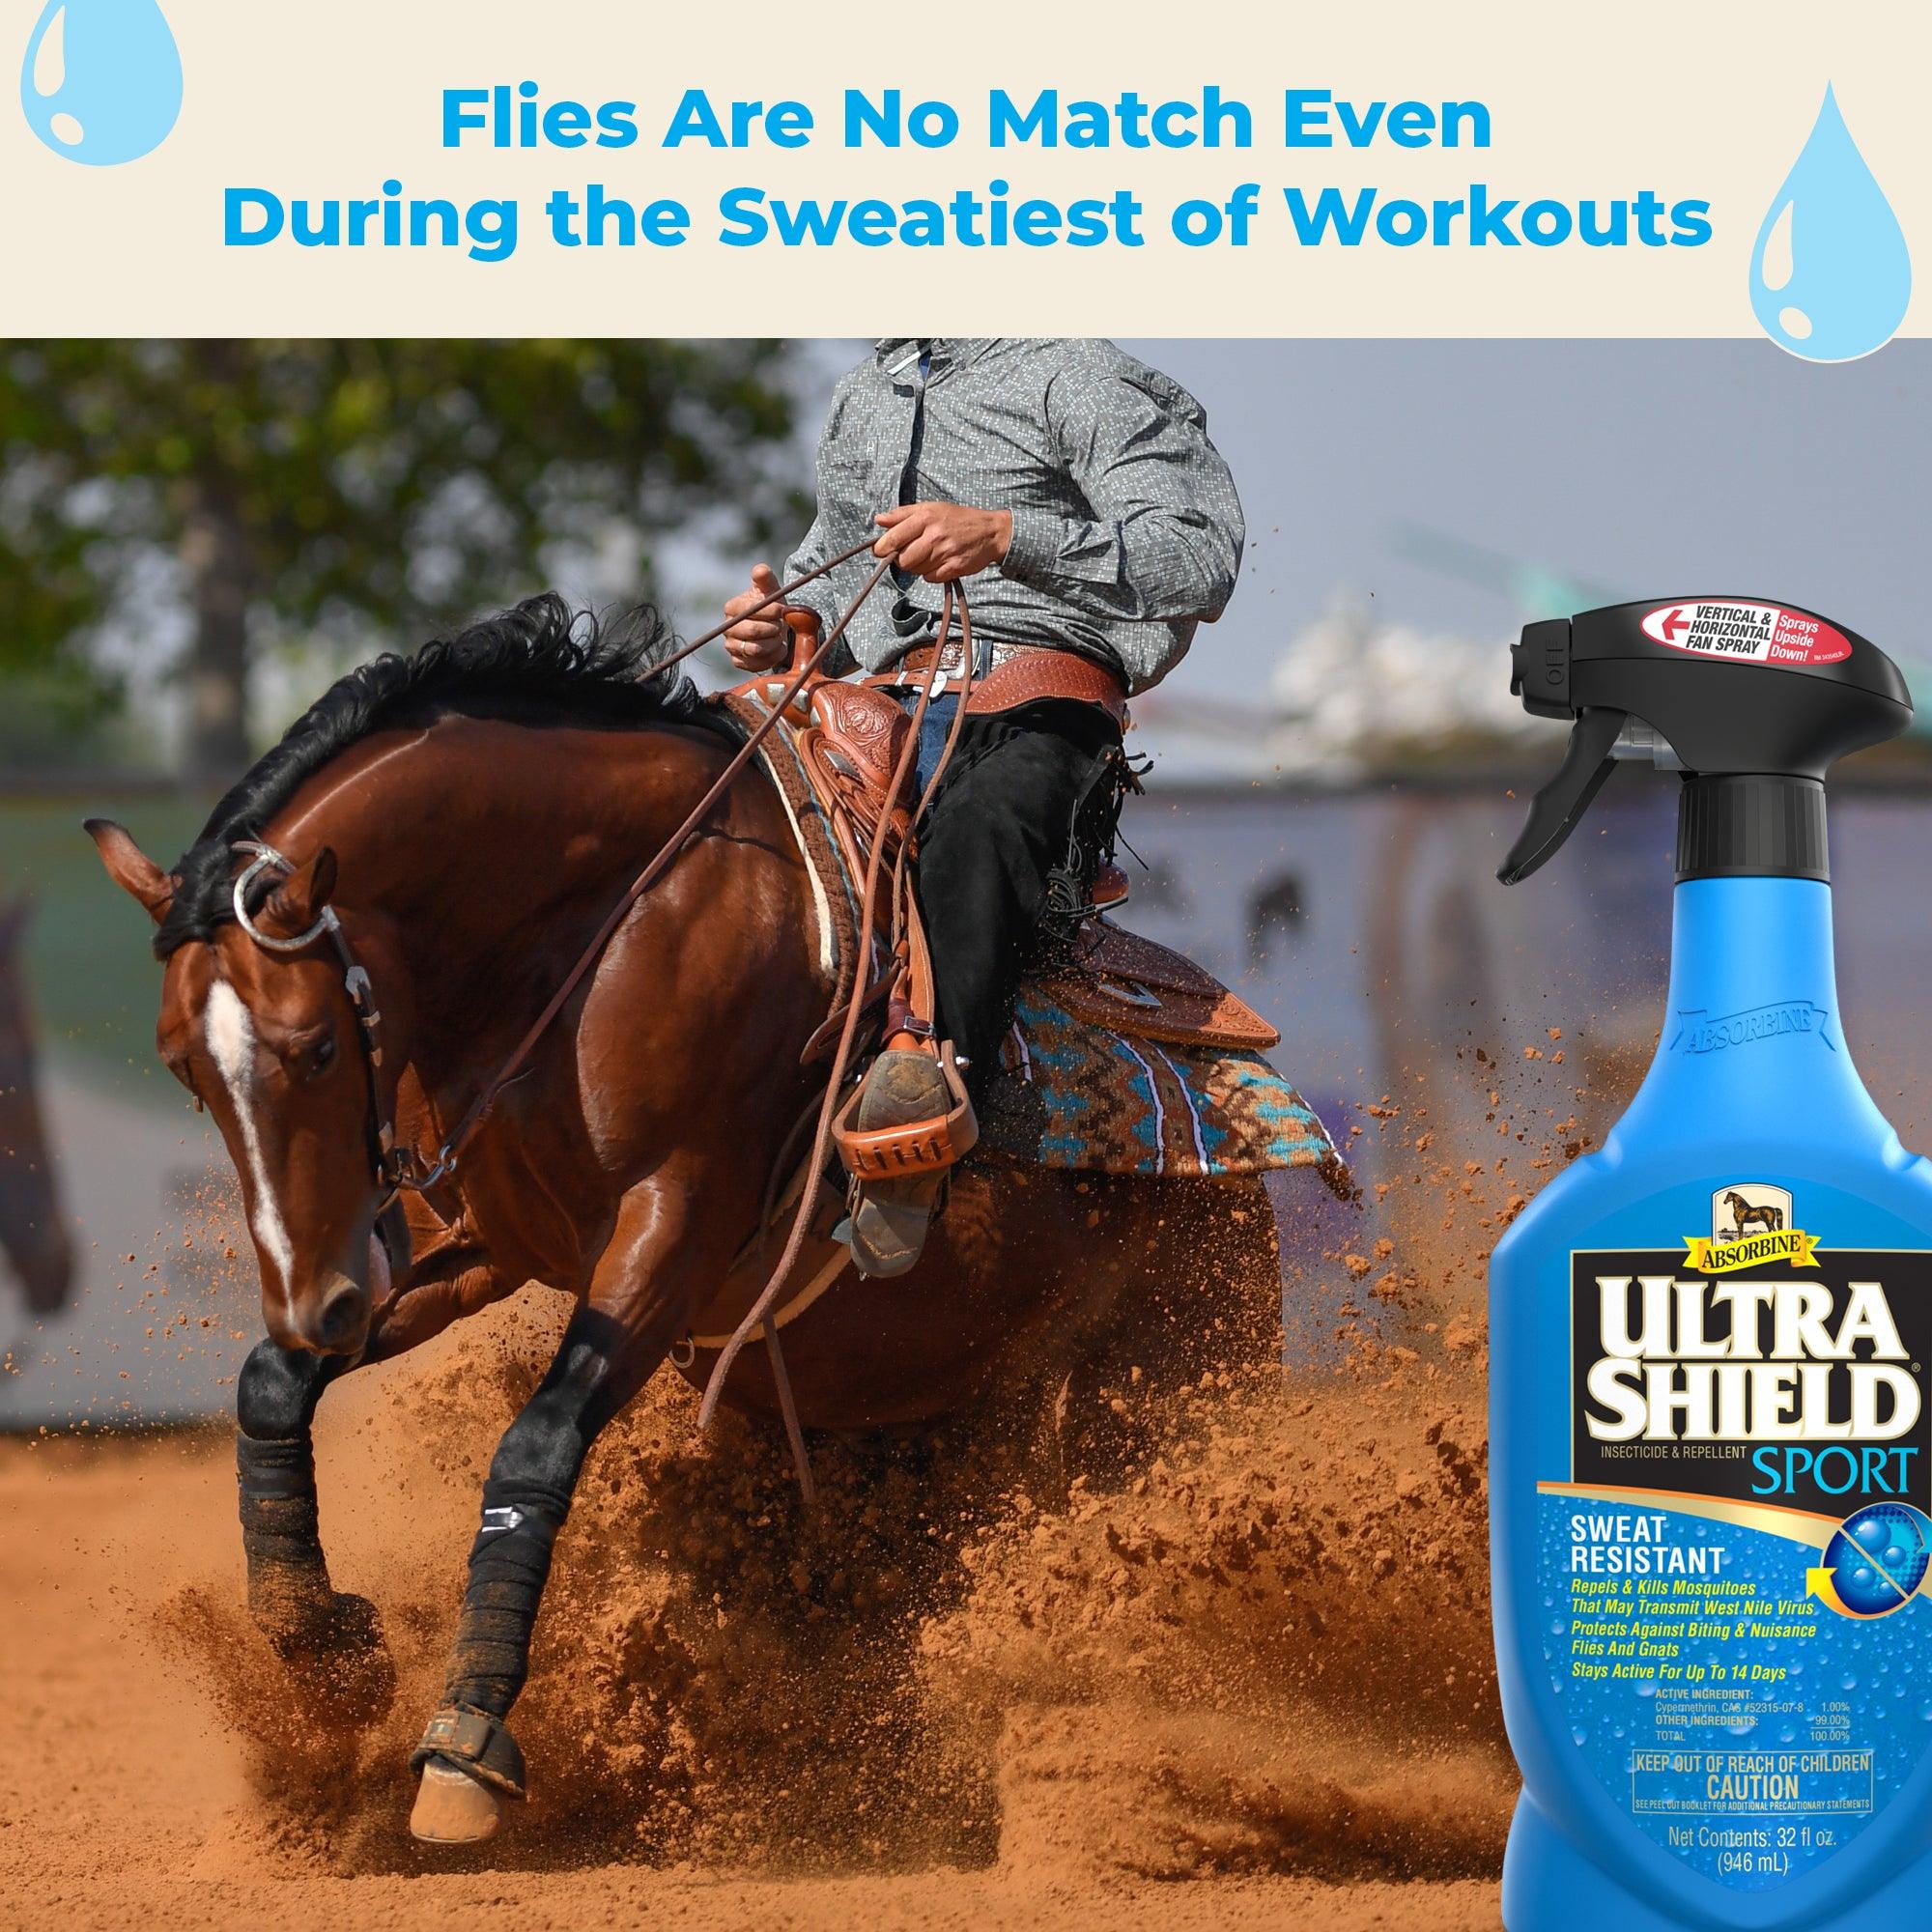 Western cowboy riding a beautiful brown horse planting his back legs into a slide.  UltraShield Sport "Flies are no match even during the sweatiest workouts.